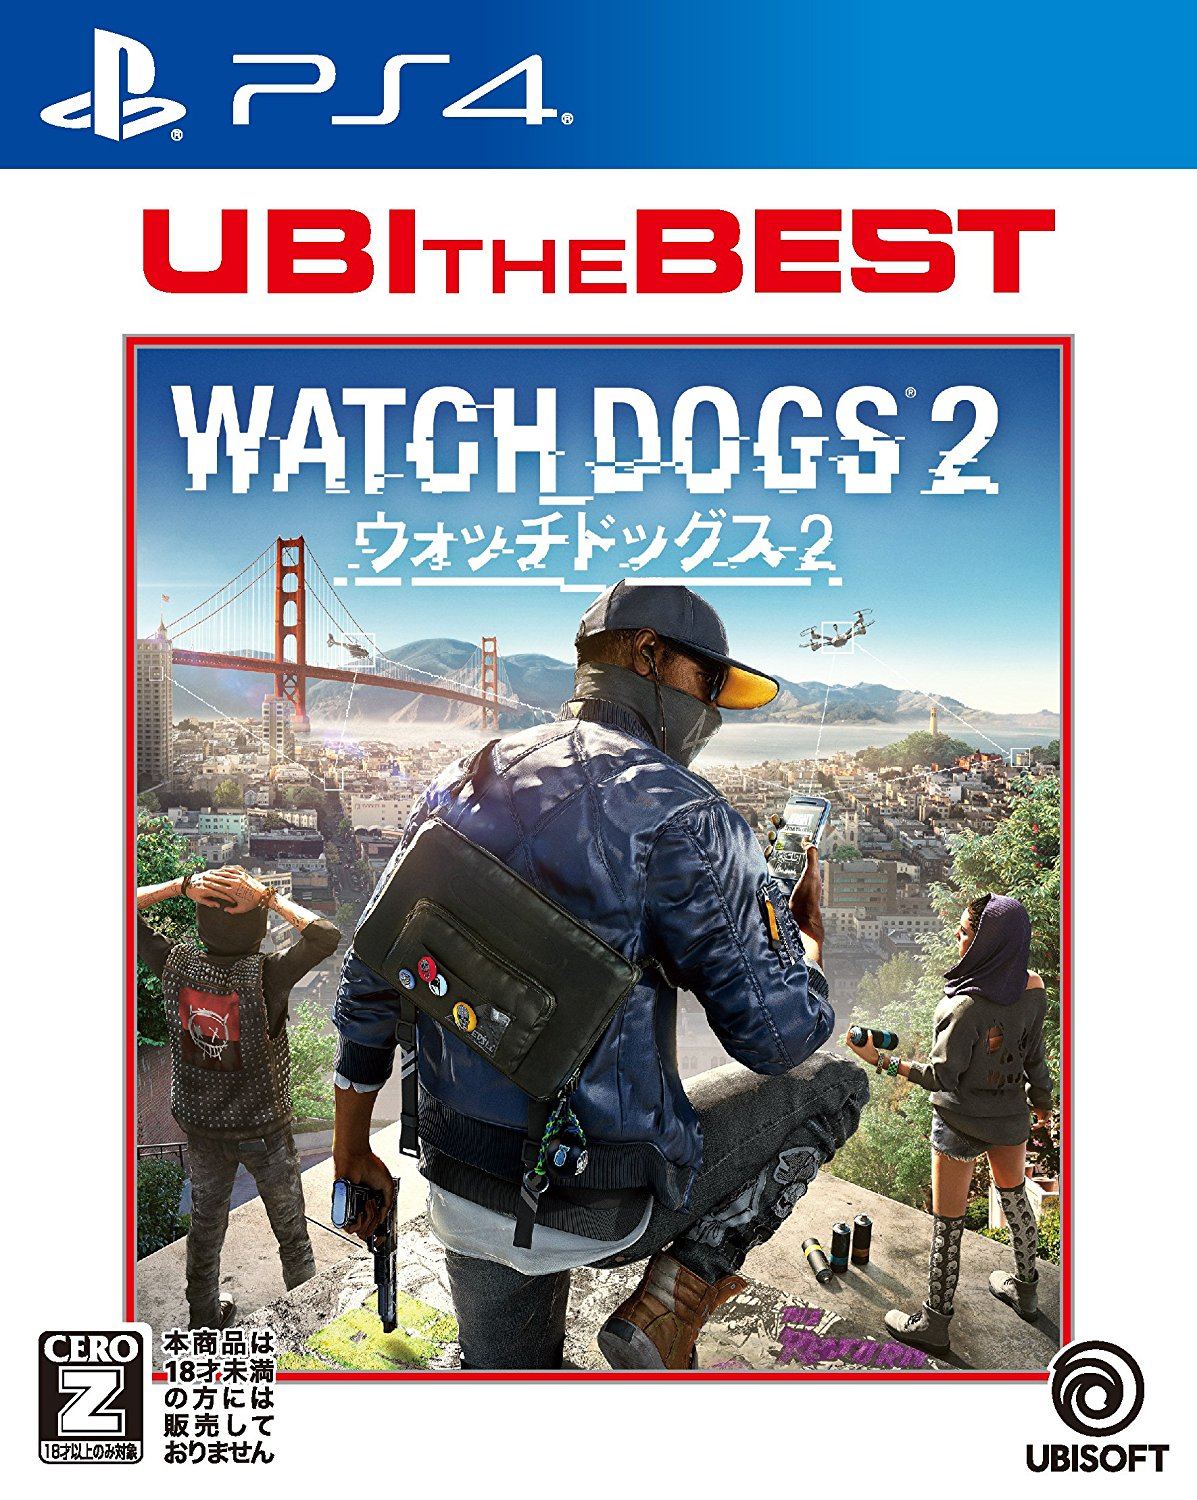 Watch Dogs 2 (UBI the Best) for PlayStation 4 - Bitcoin & Lightning accepted